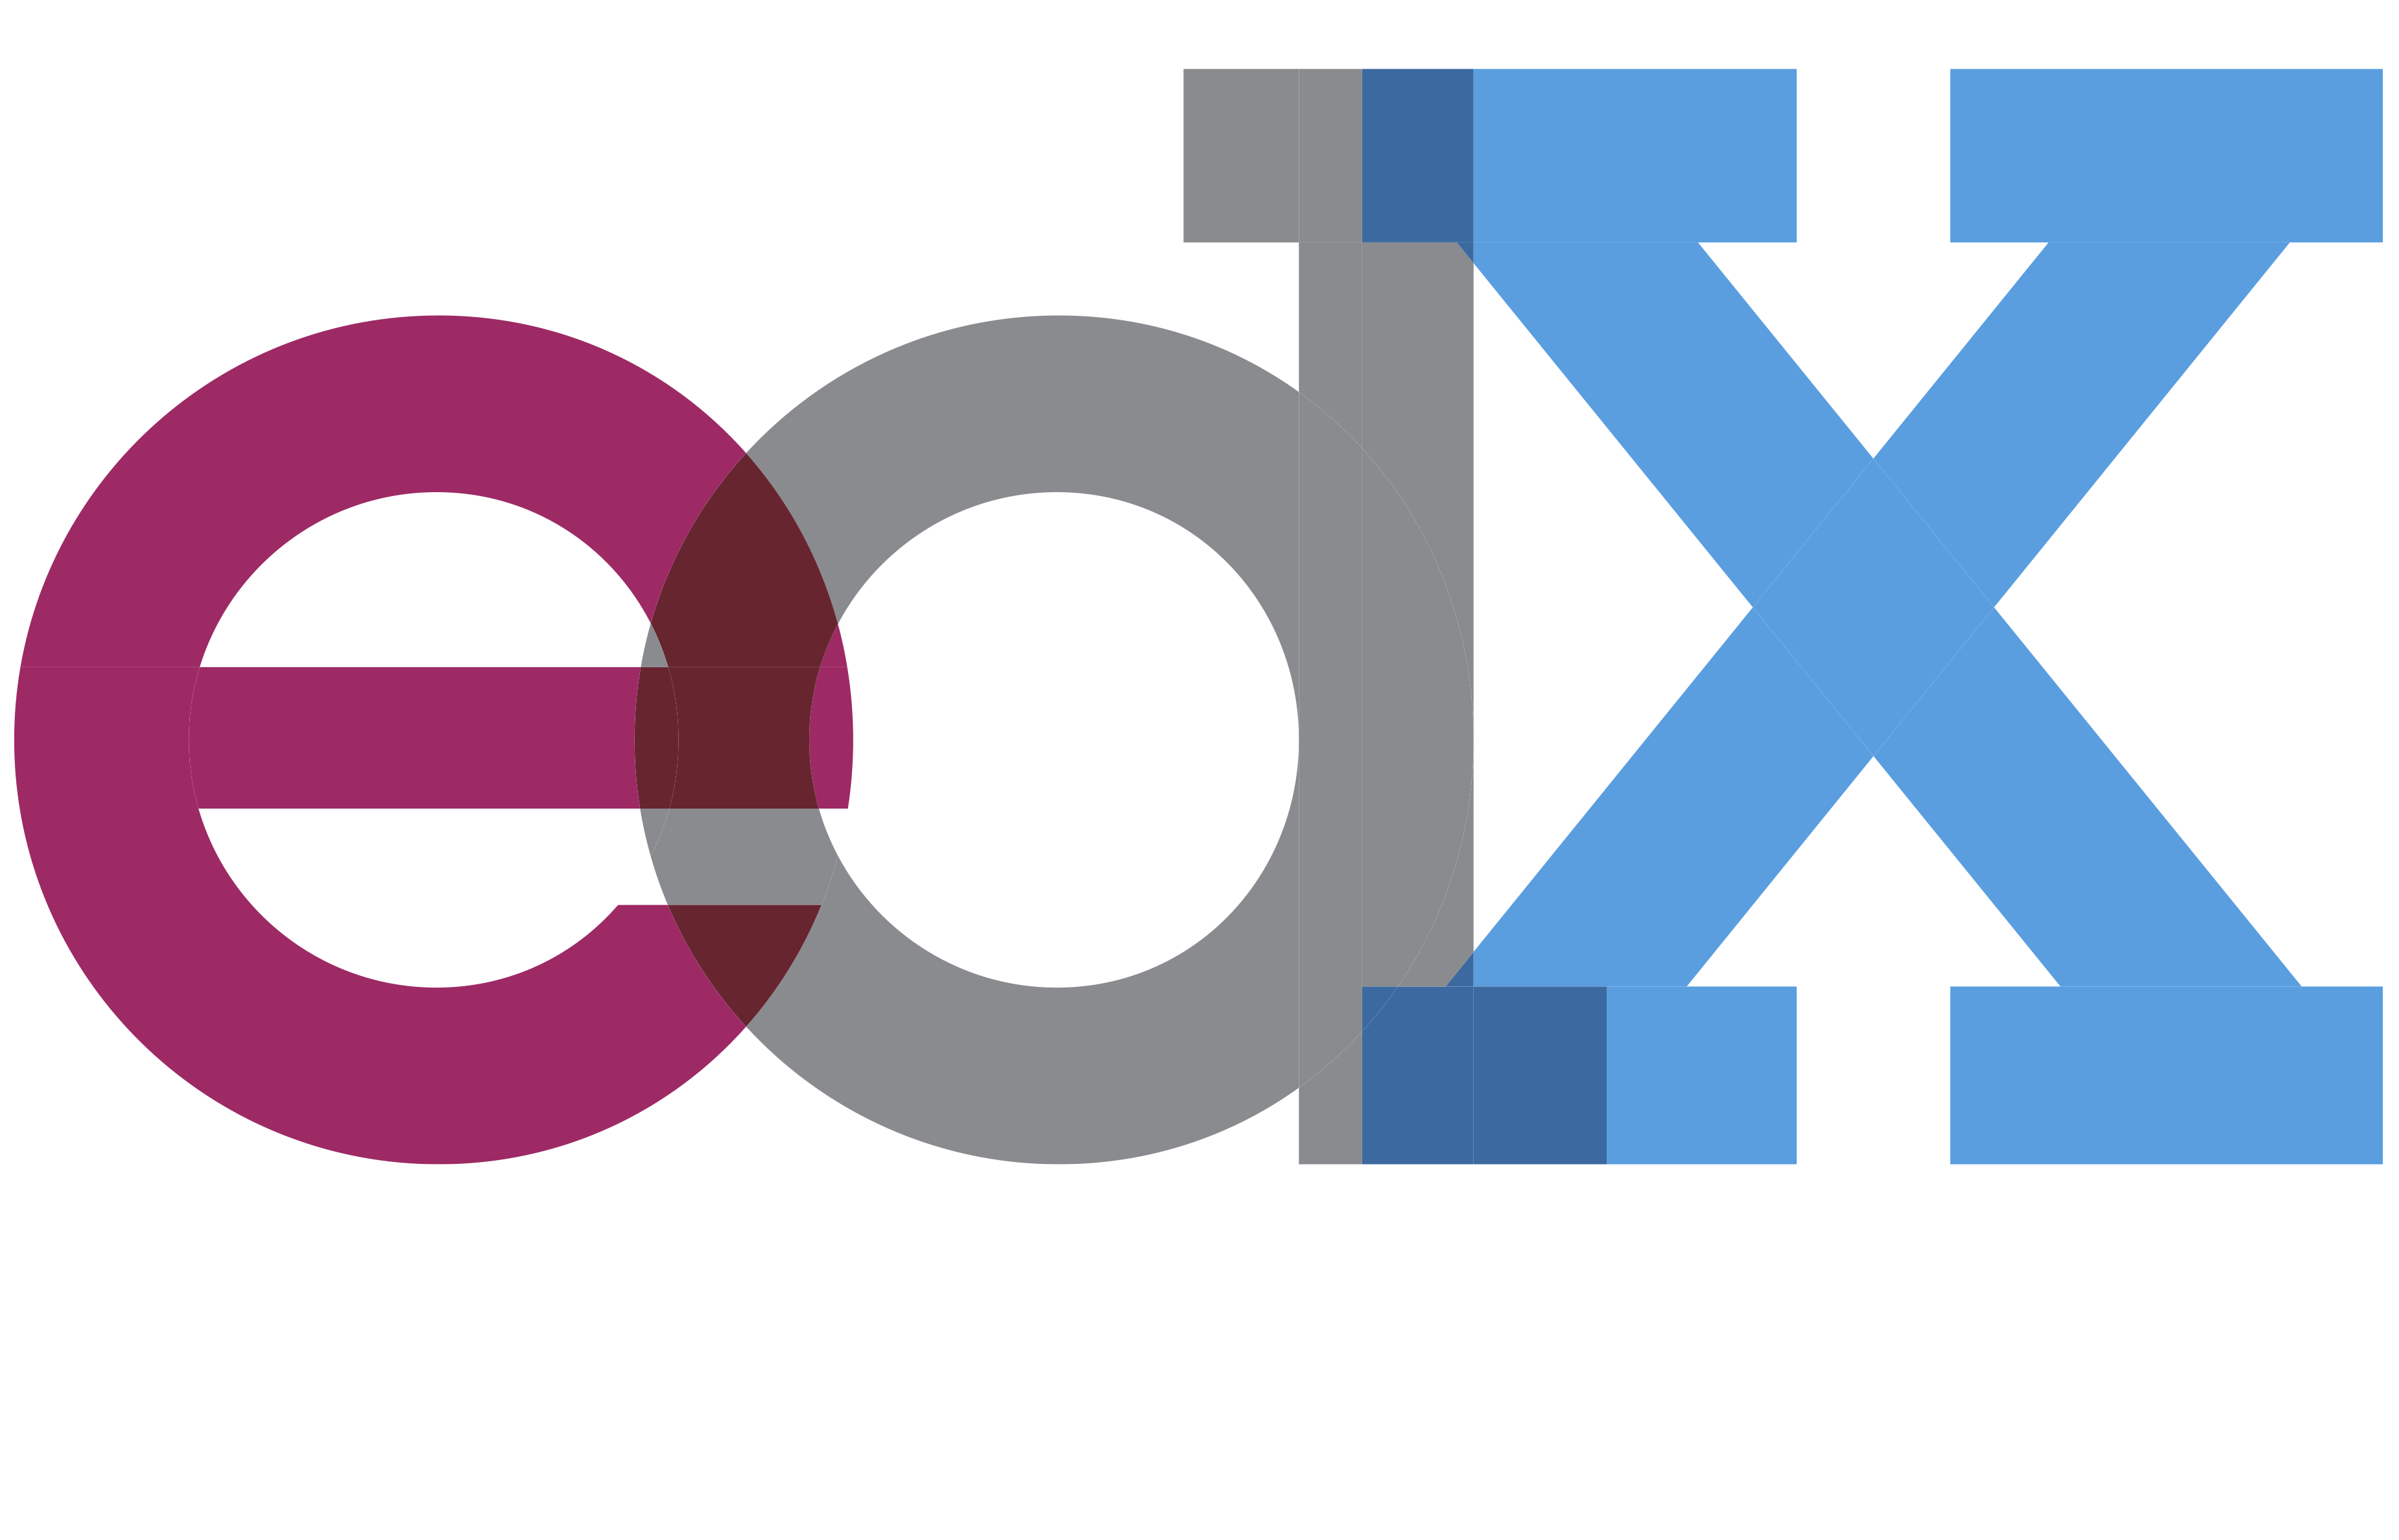 Review of the edX app – features and differences from other platforms